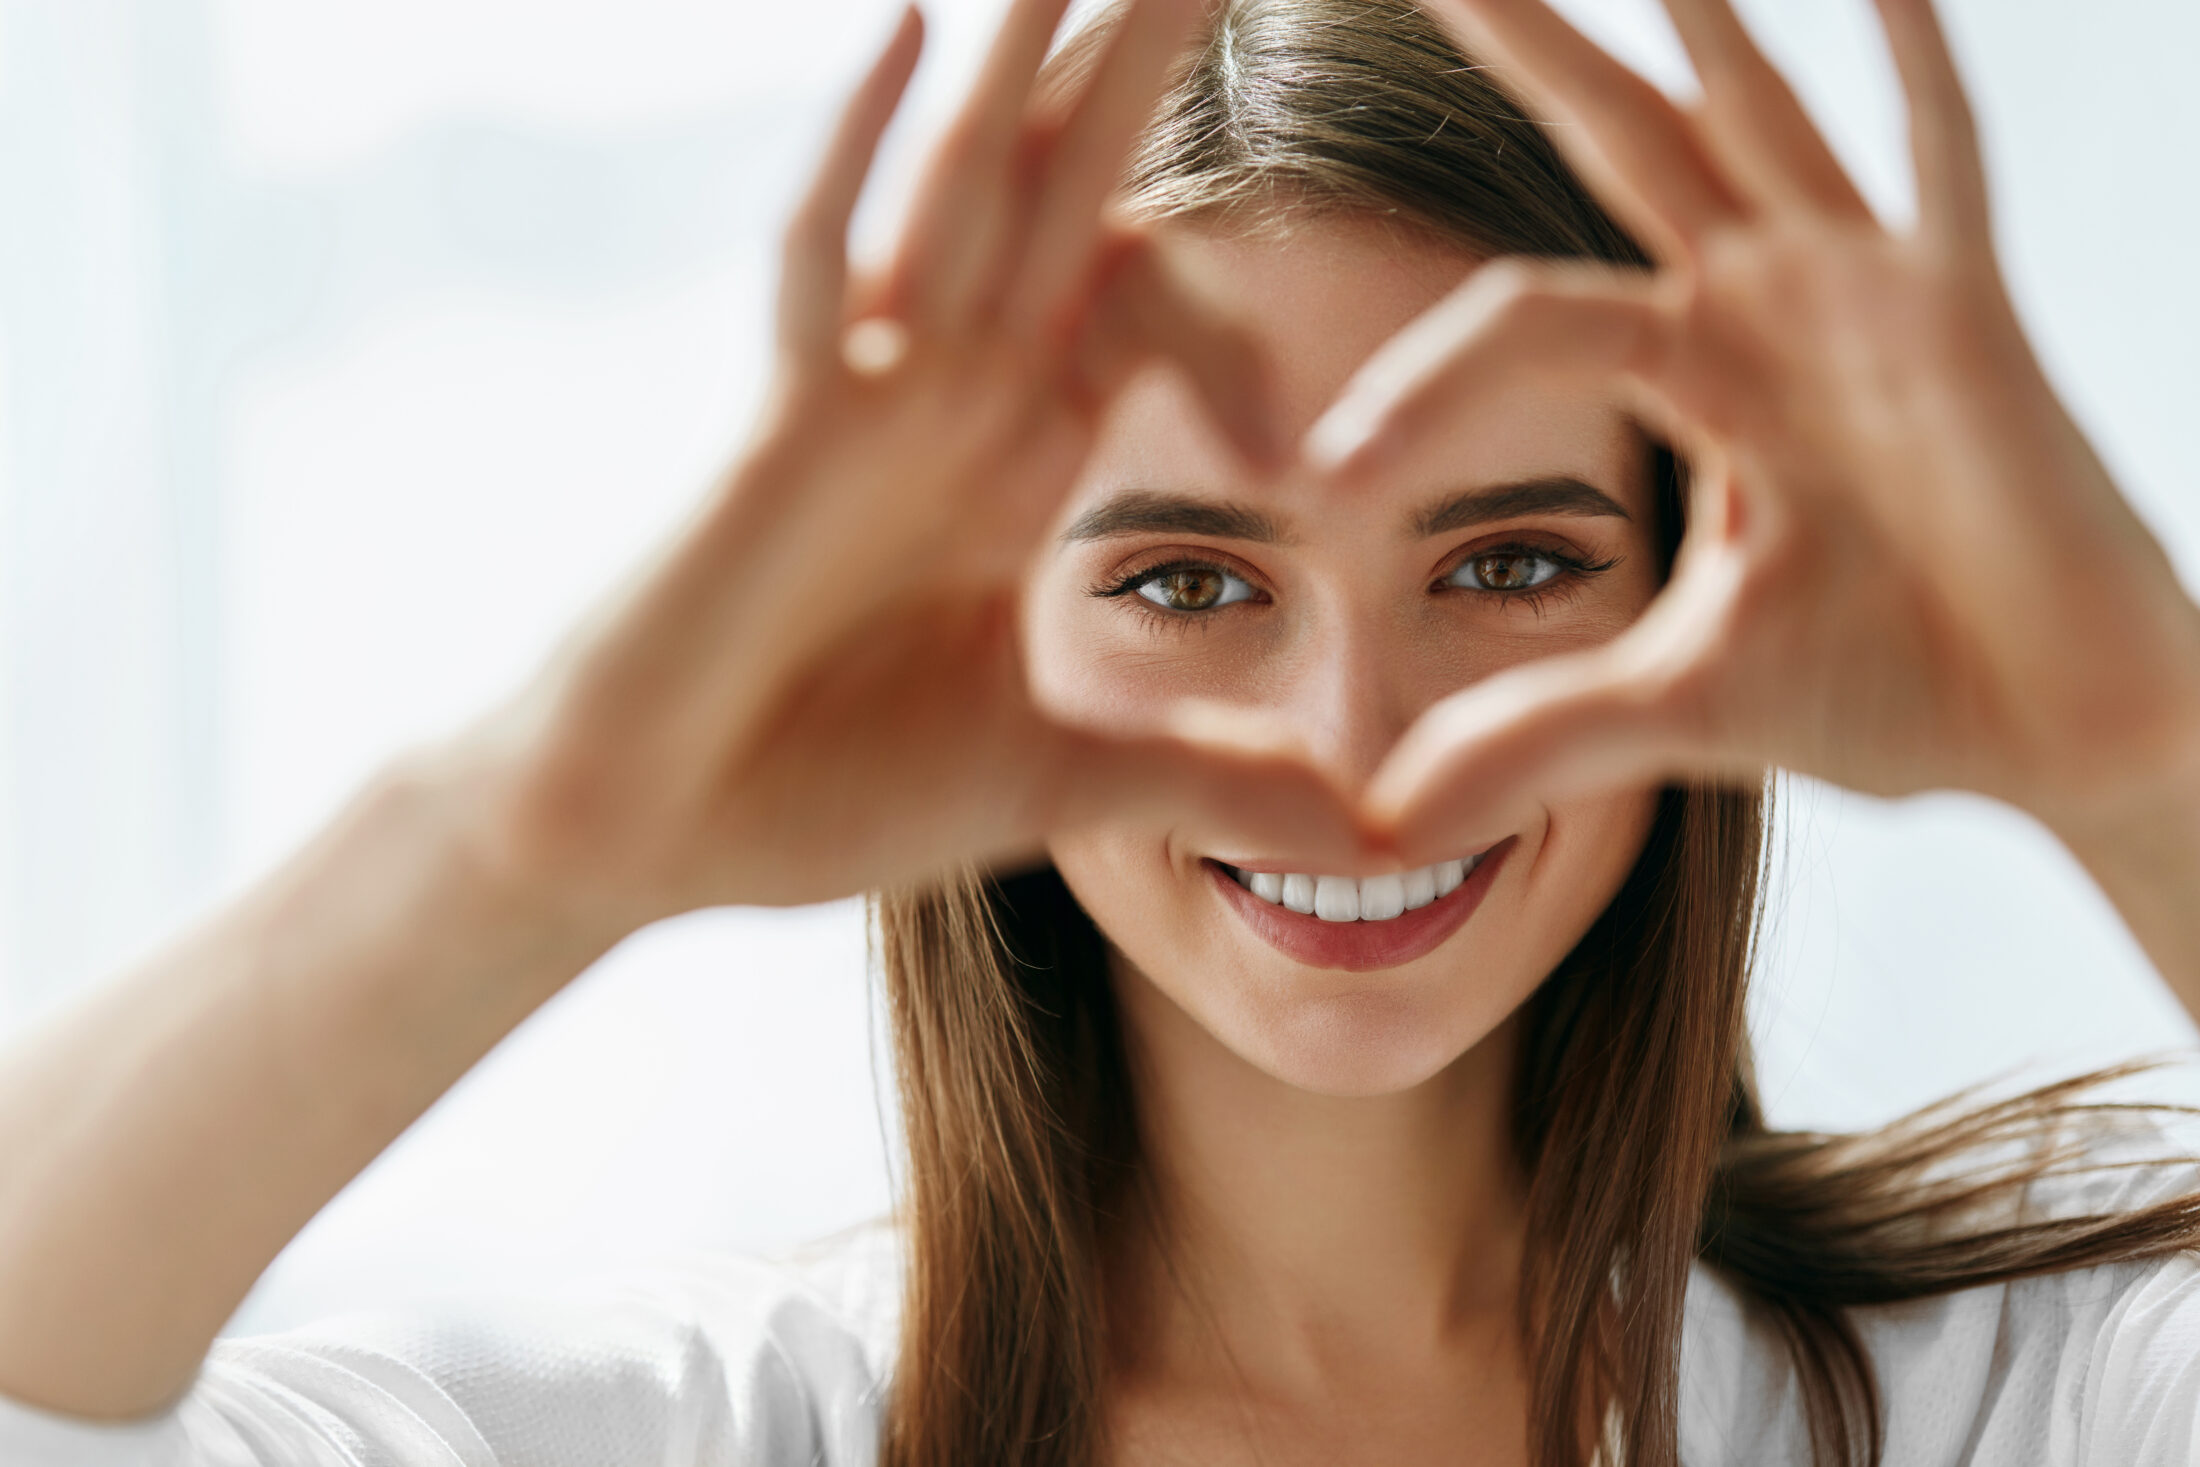 A photo of woman making a heart shape with her hands.